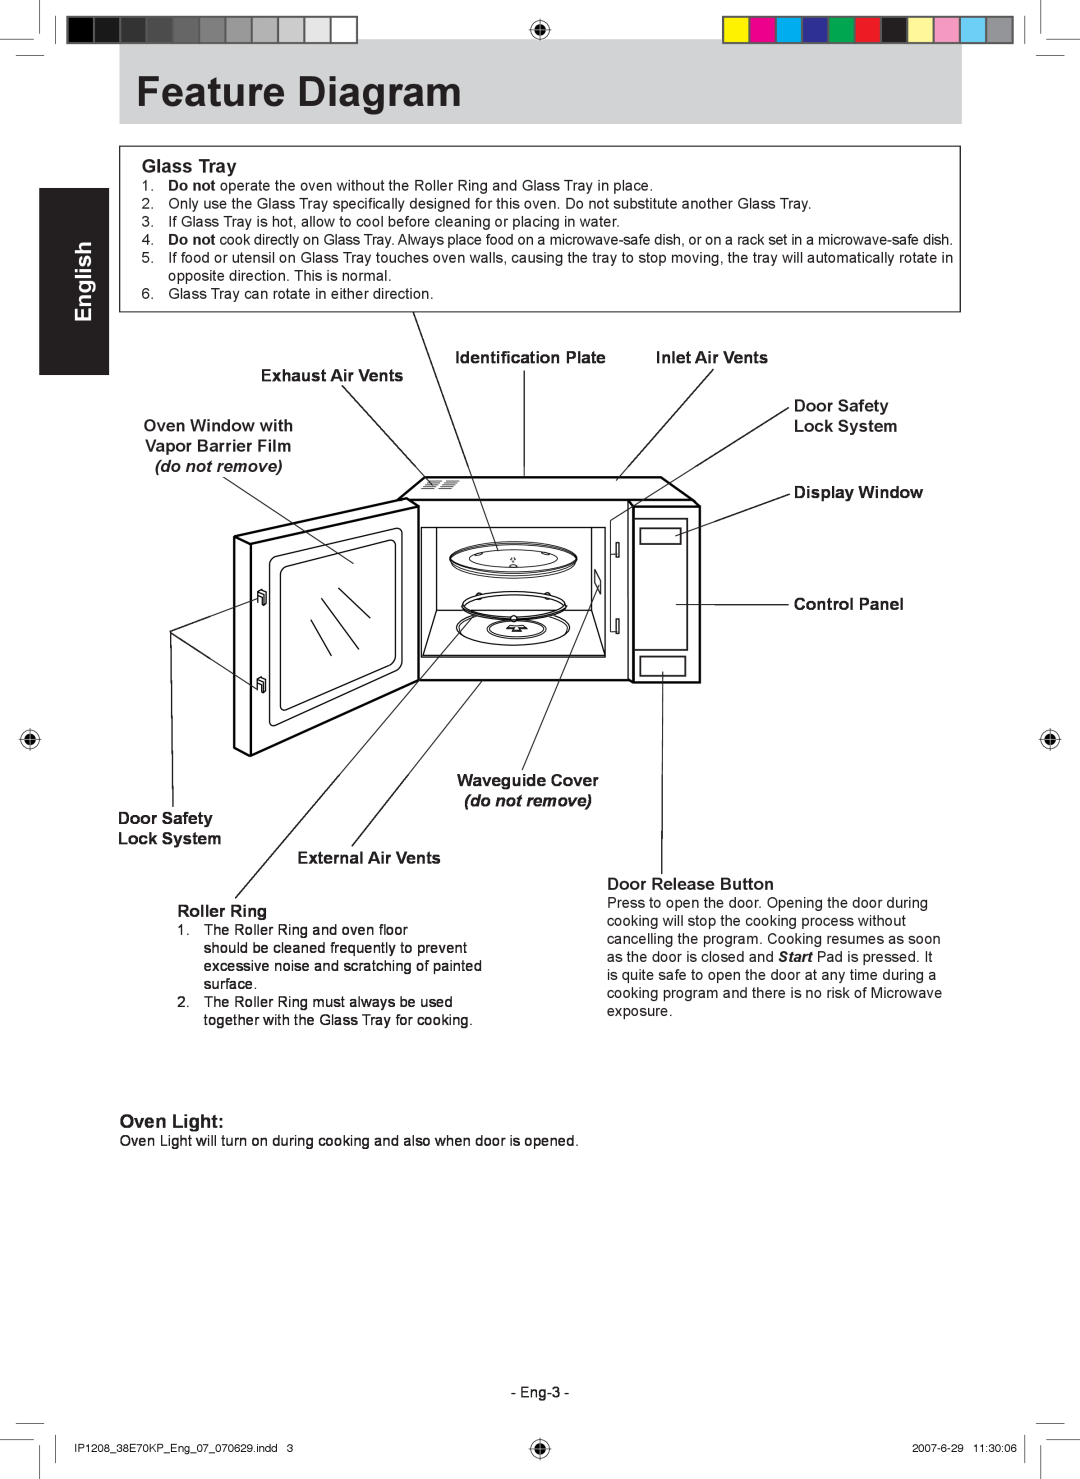 Panasonic NN-ST757W manual Feature Diagram, Glass Tray, Oven Light, English, do not remove 